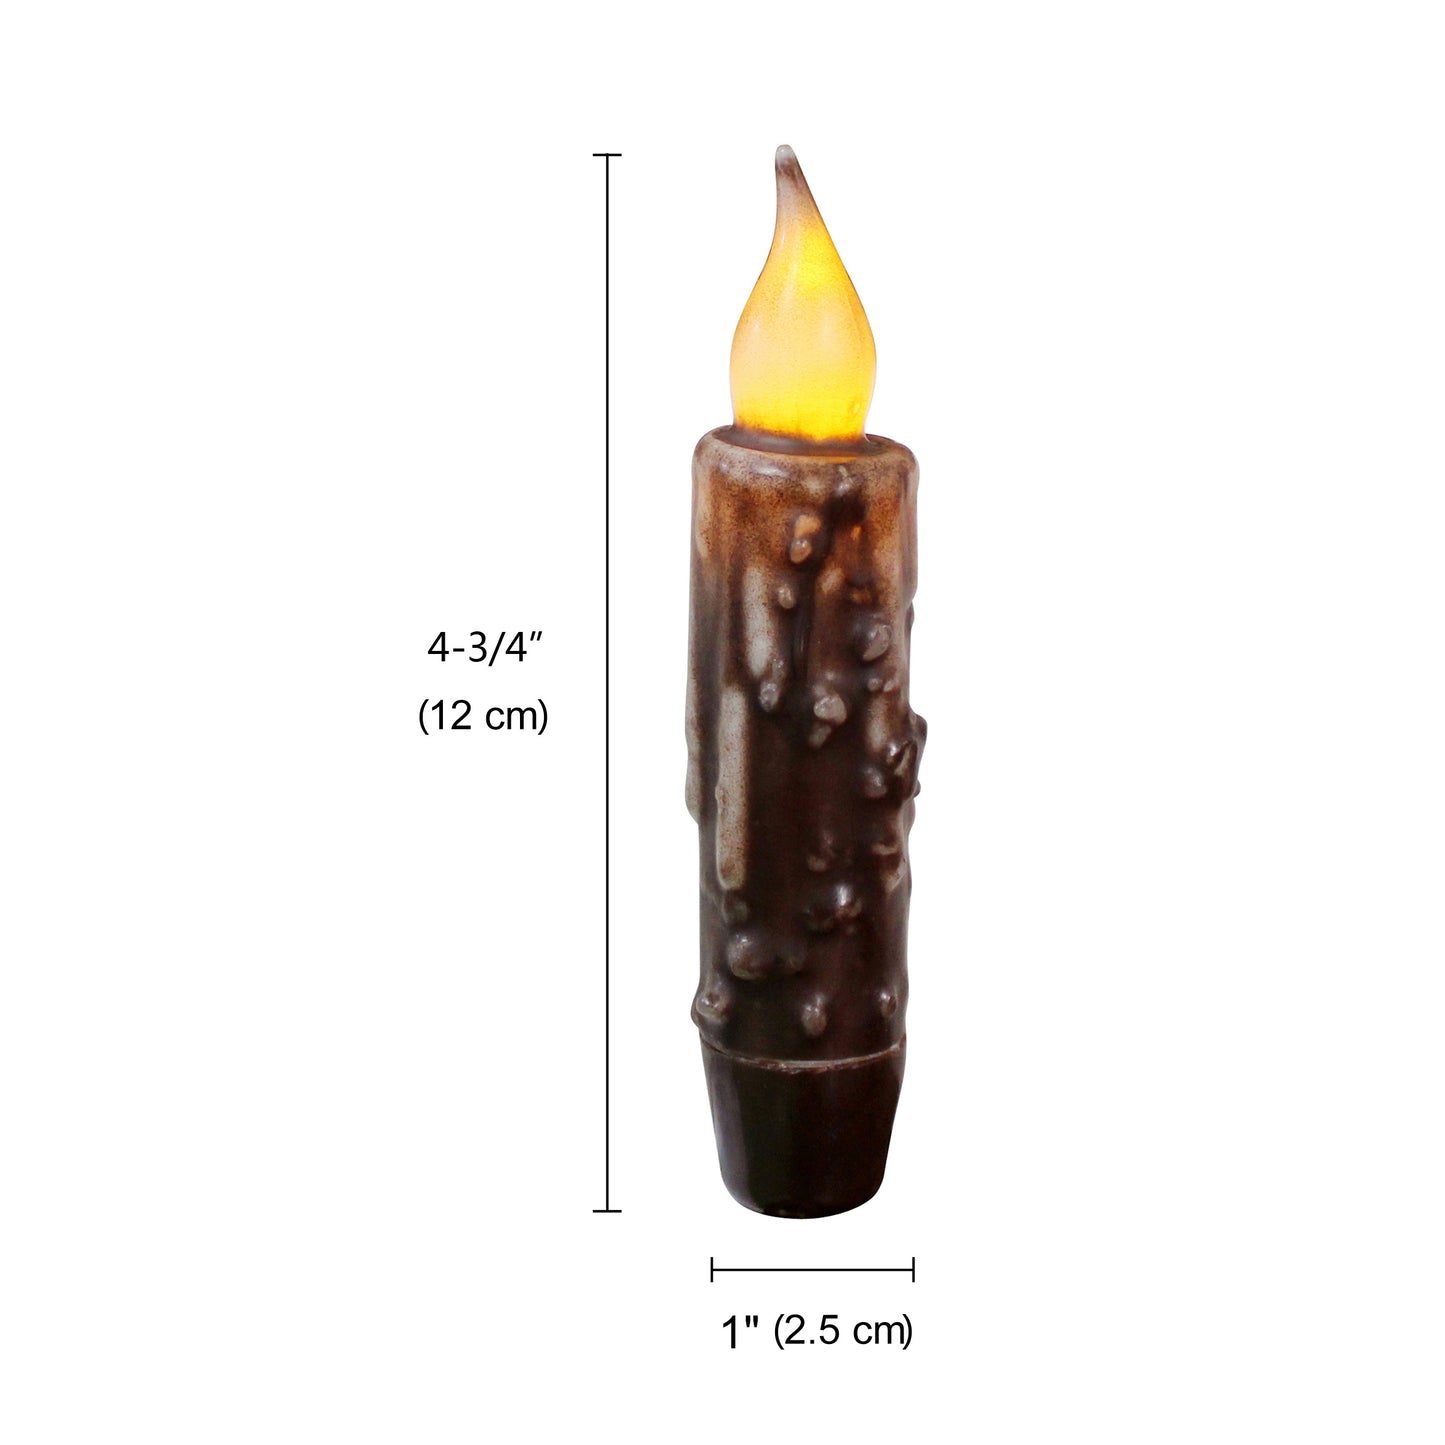 CVHOMEDECO. Real Wax Hand Dipped Battery Operated LED Timer Taper Candles Rustic Primitive Flameless Lights Décor, 4.75 Inch, Brwon, 6 PCS in a Package